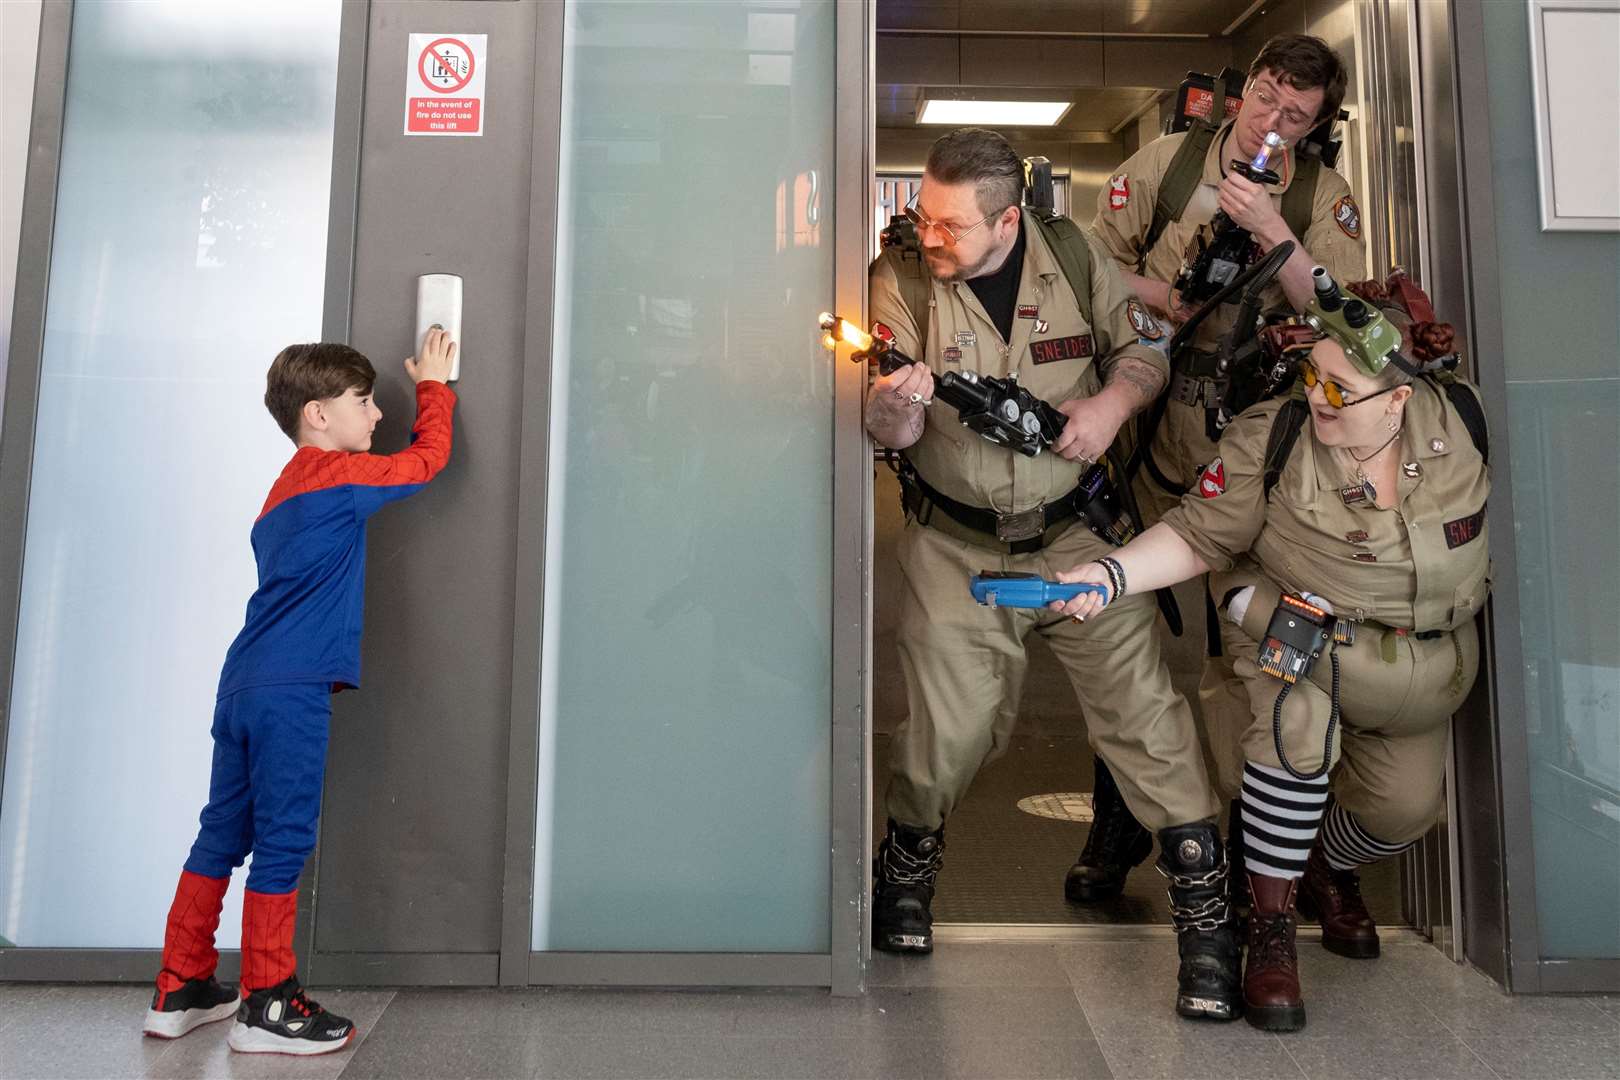 The Ghostbusters encounter a mini Spider-Man at a past Comic Con event.